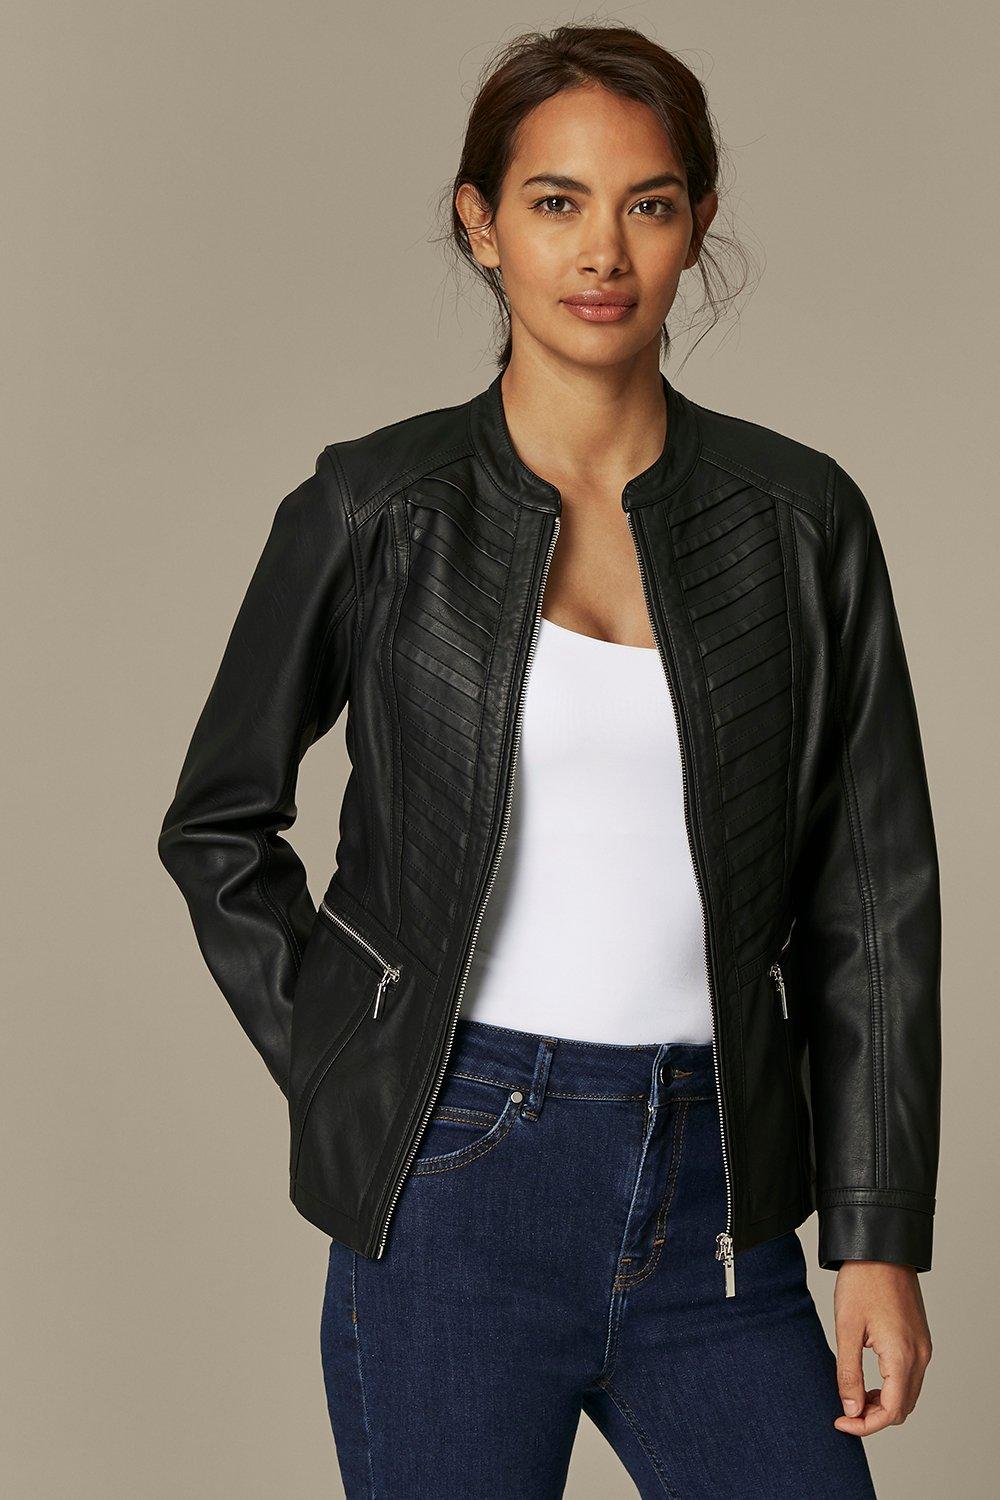 Pick Up A Timeless Wardrobe Staple With This Faux Leather Jacket. A Sleek Black Finish And On-Trend Pleat Detailing Down The Front Will Have You Wearing This Jacket On-Repeat. For A Classic Weekend Look, Wear Over A White Tee And Blue Skinny Jeans, A